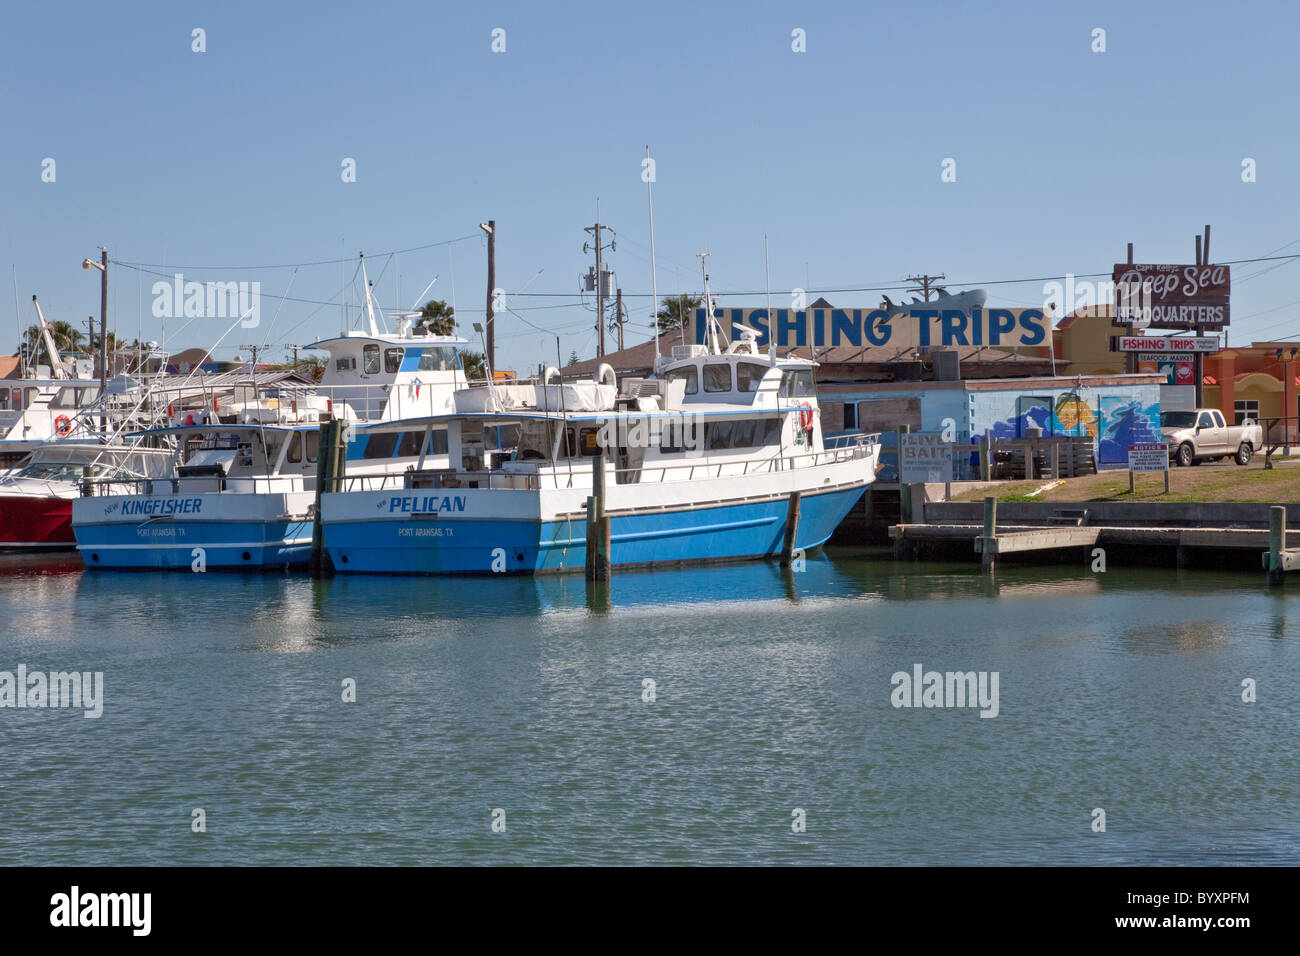 Deep sea 'day fishing' excursions, boats moored, Stock Photo